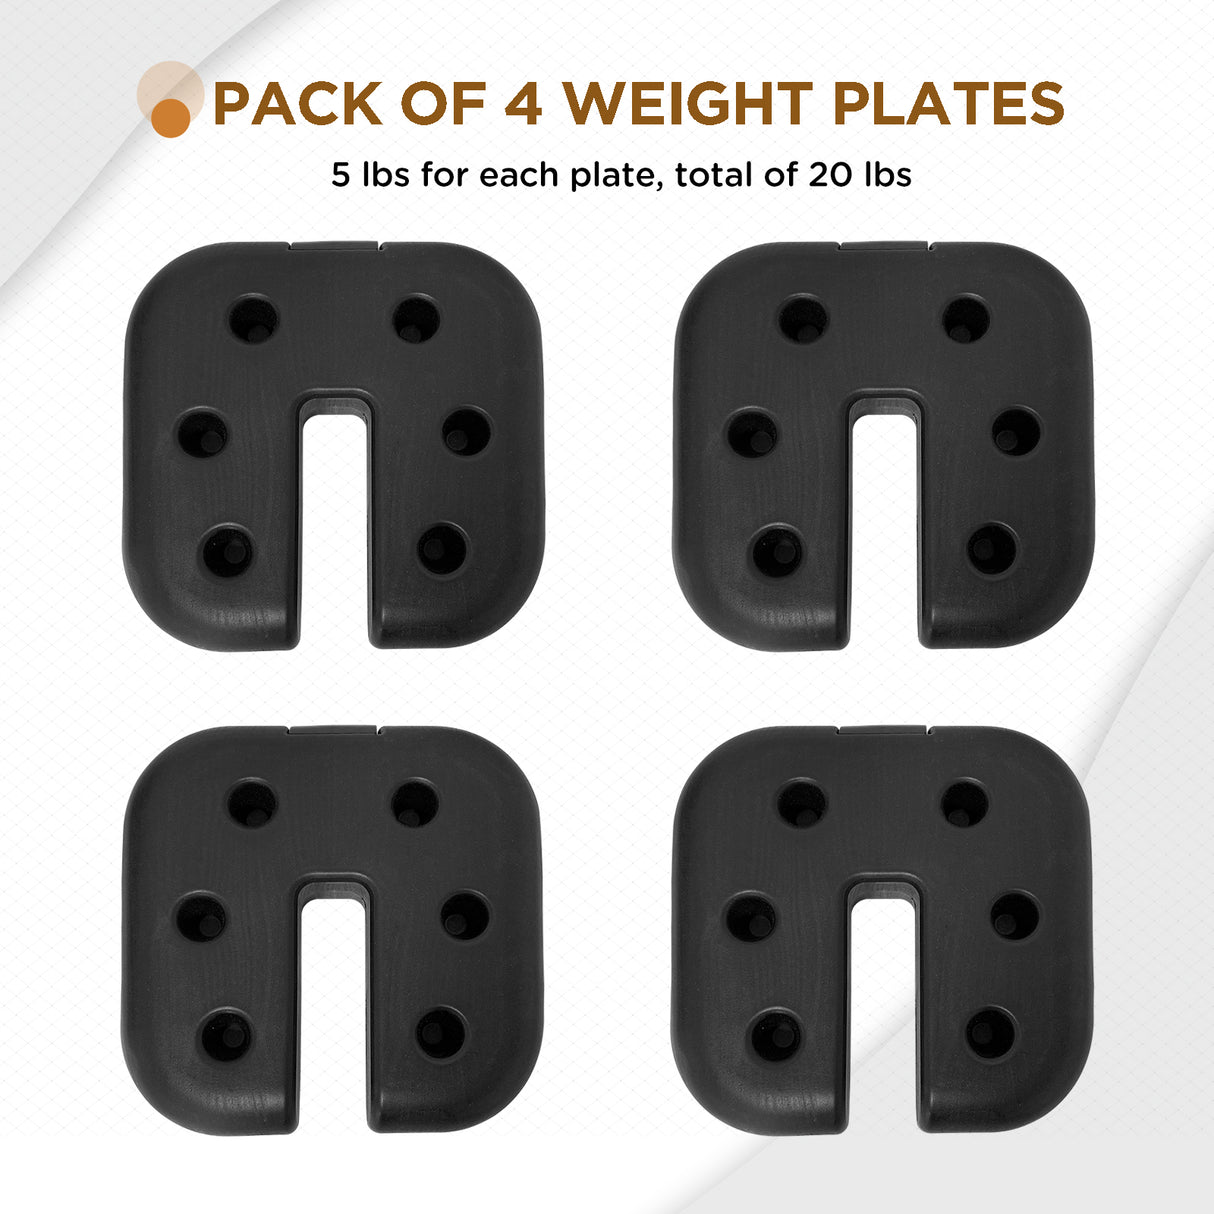 EAGLE PEAK Canopy Weight Plates 4-Set for Pop up Canopy, Tent, Gazebo, Umbrellas, Tent Weights for Legs, 20 lbs, Black